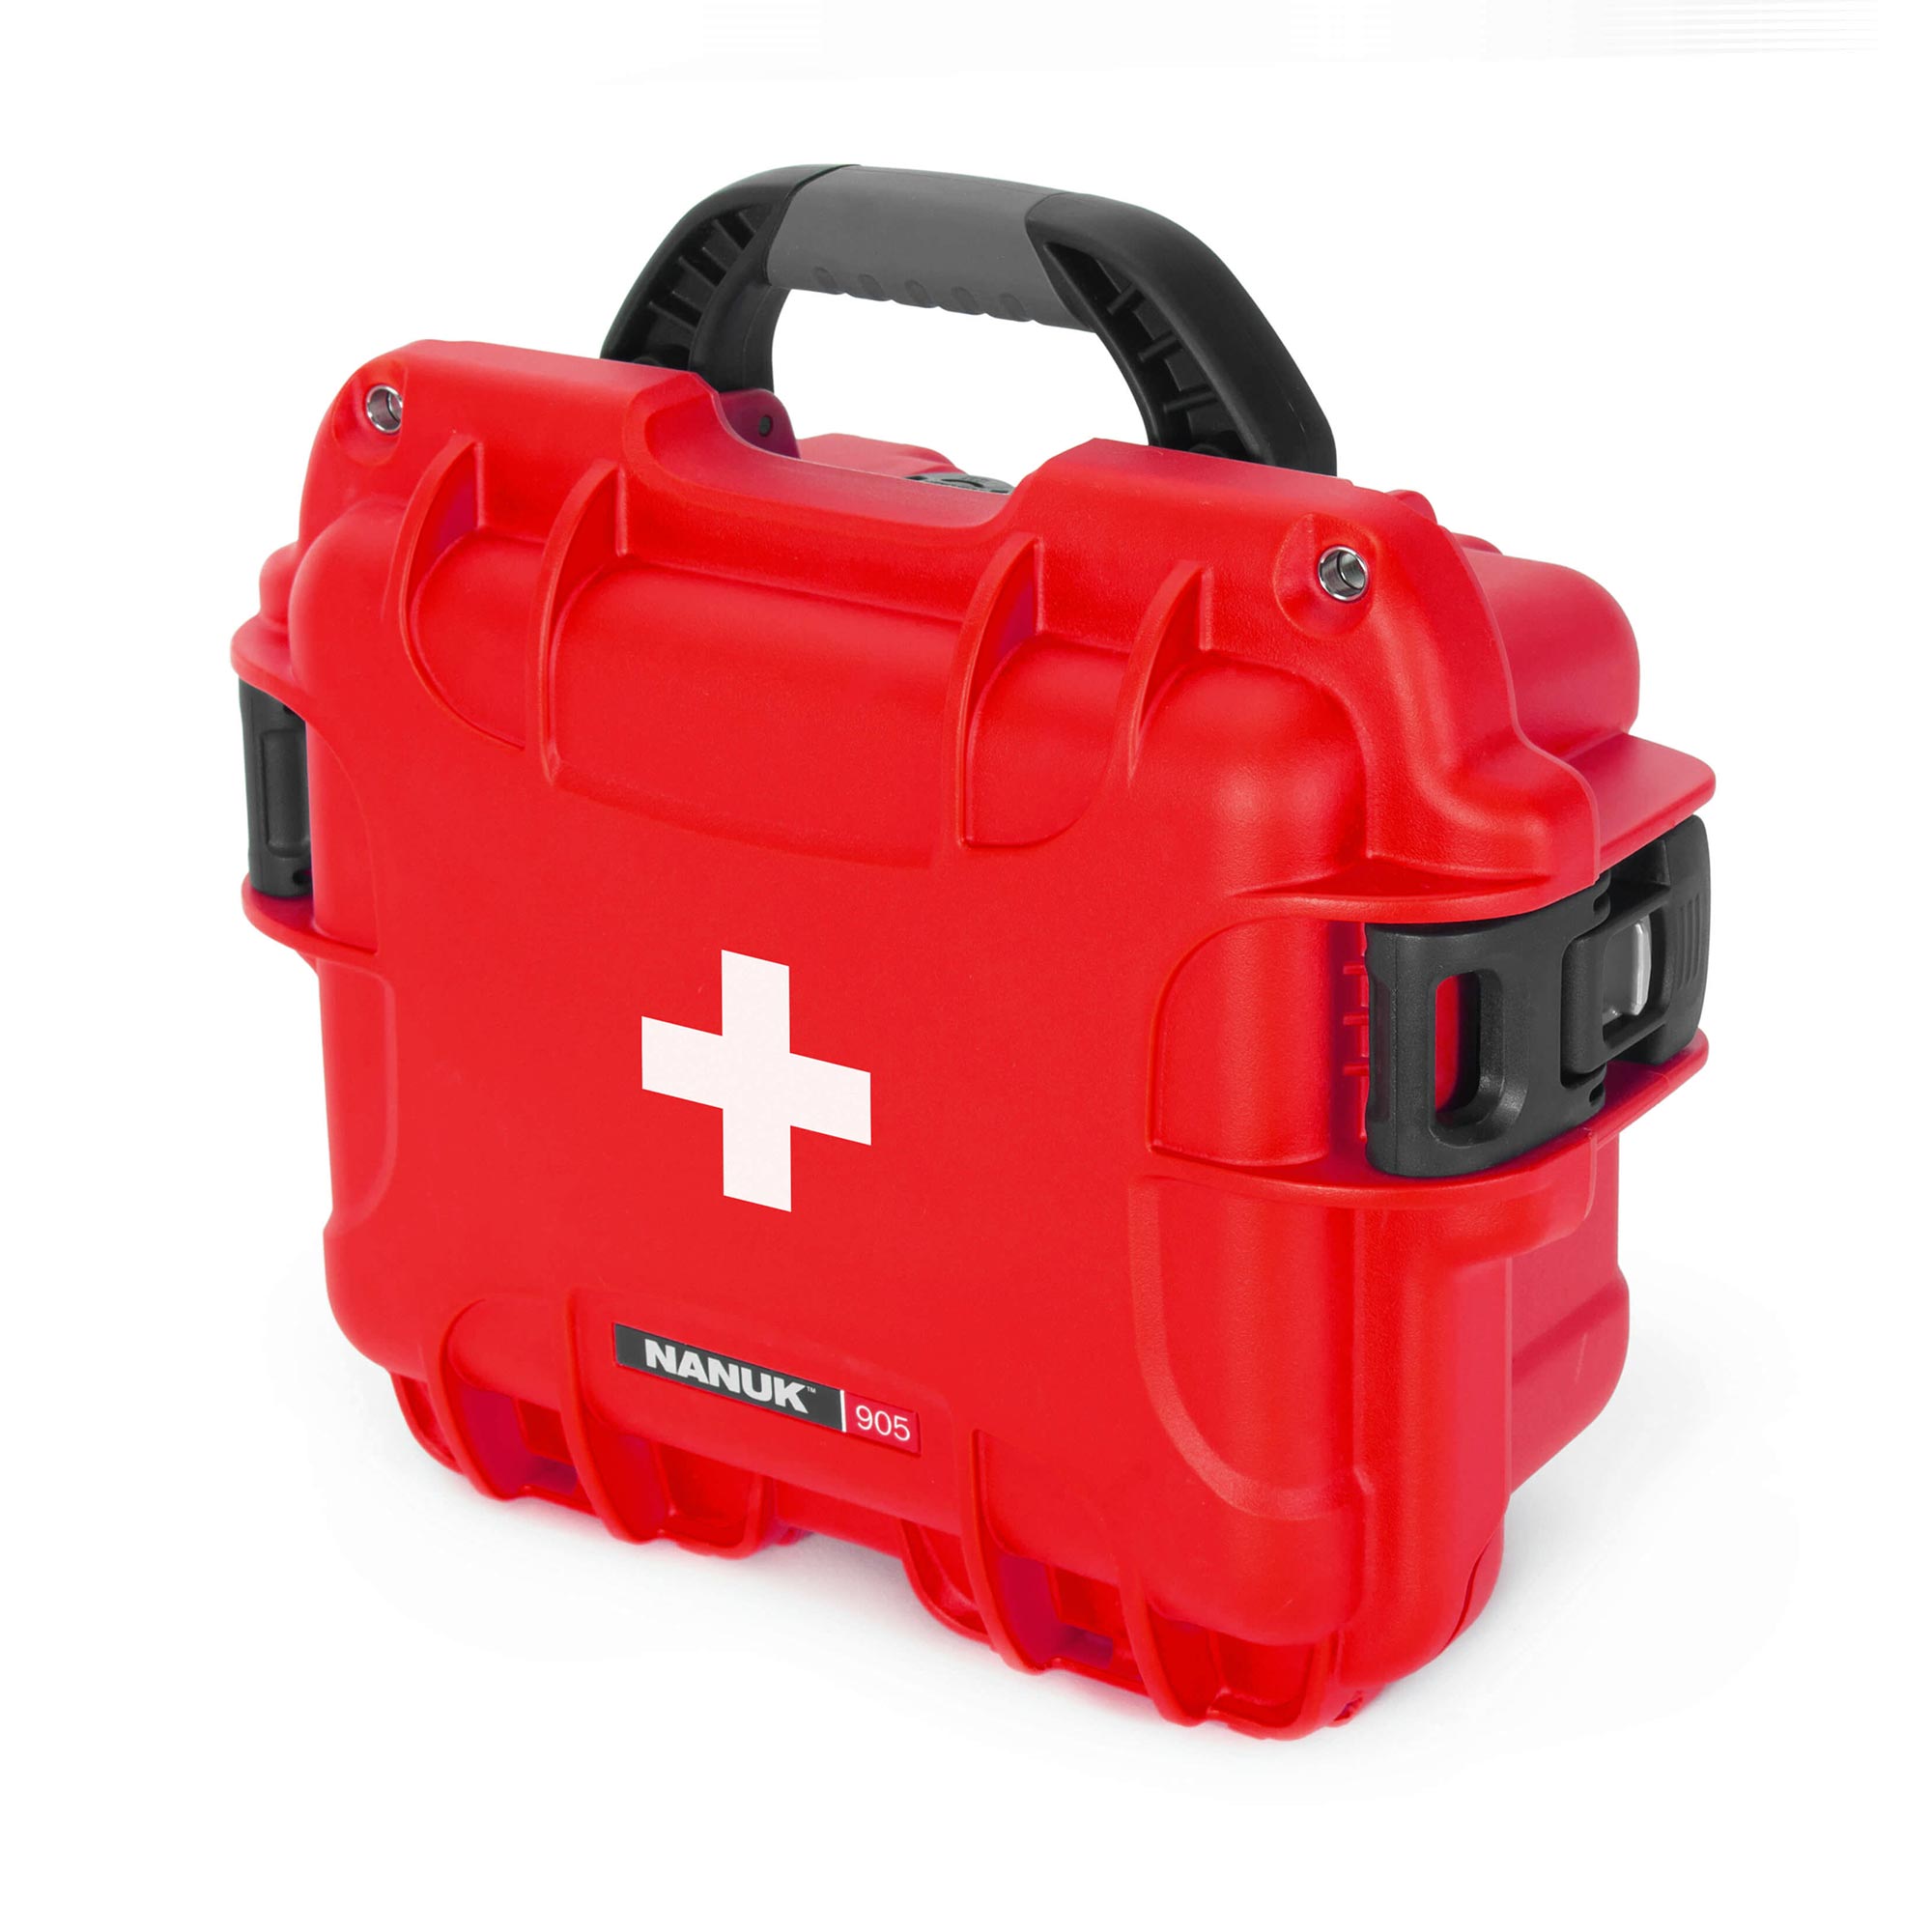 https://cdn.shopify.com/s/files/1/0526/9035/4360/products/outdoors-905-first-aid-case-product-shot-red-1_f56131d5-bed9-4765-abf7-d1b1b569a2de.jpg?crop=center&height=2000&v=1638486262&width=2000